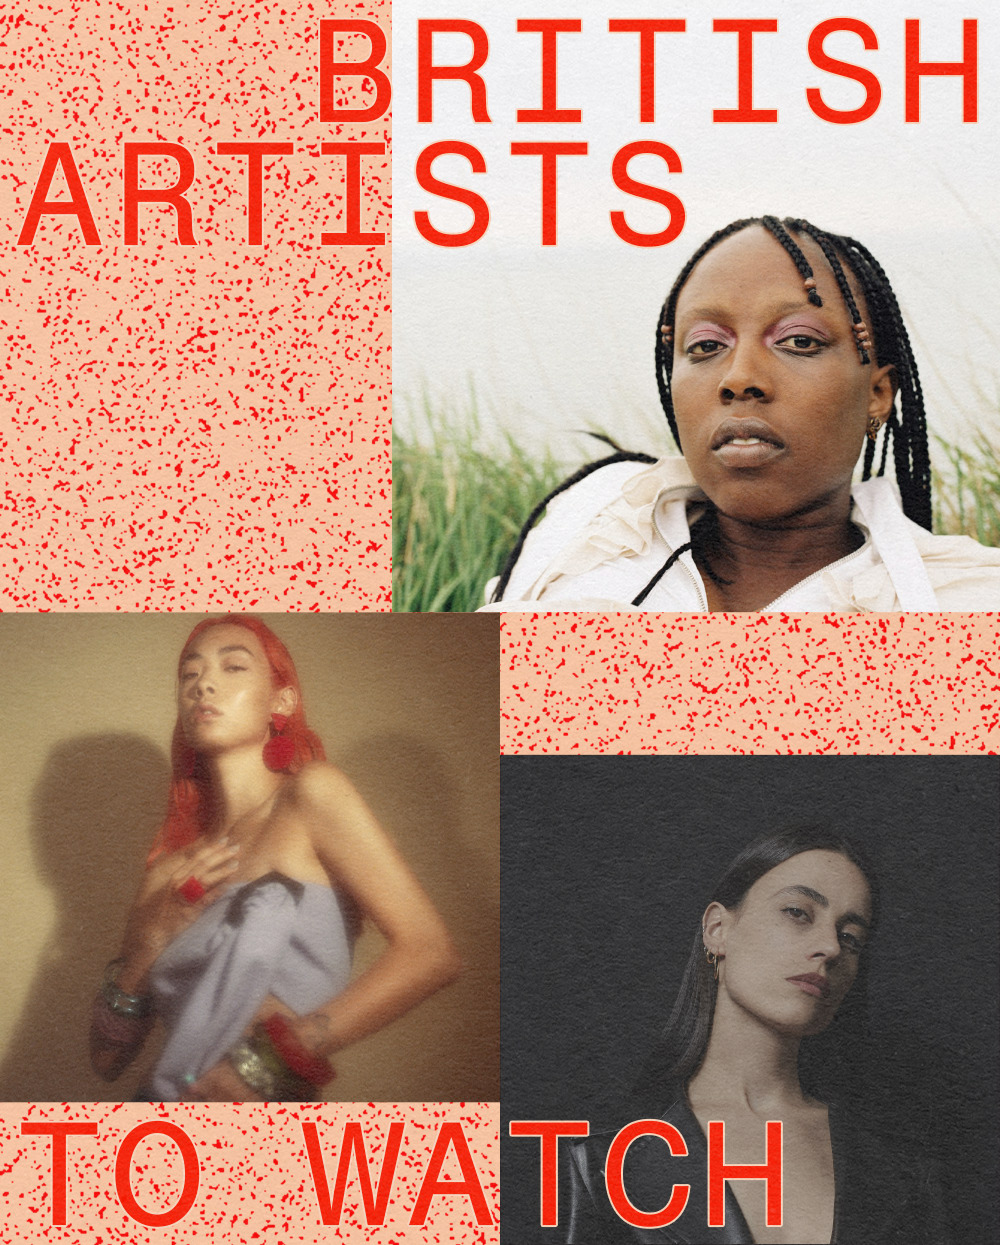 15 U.K. artists you need to listen to in 2018